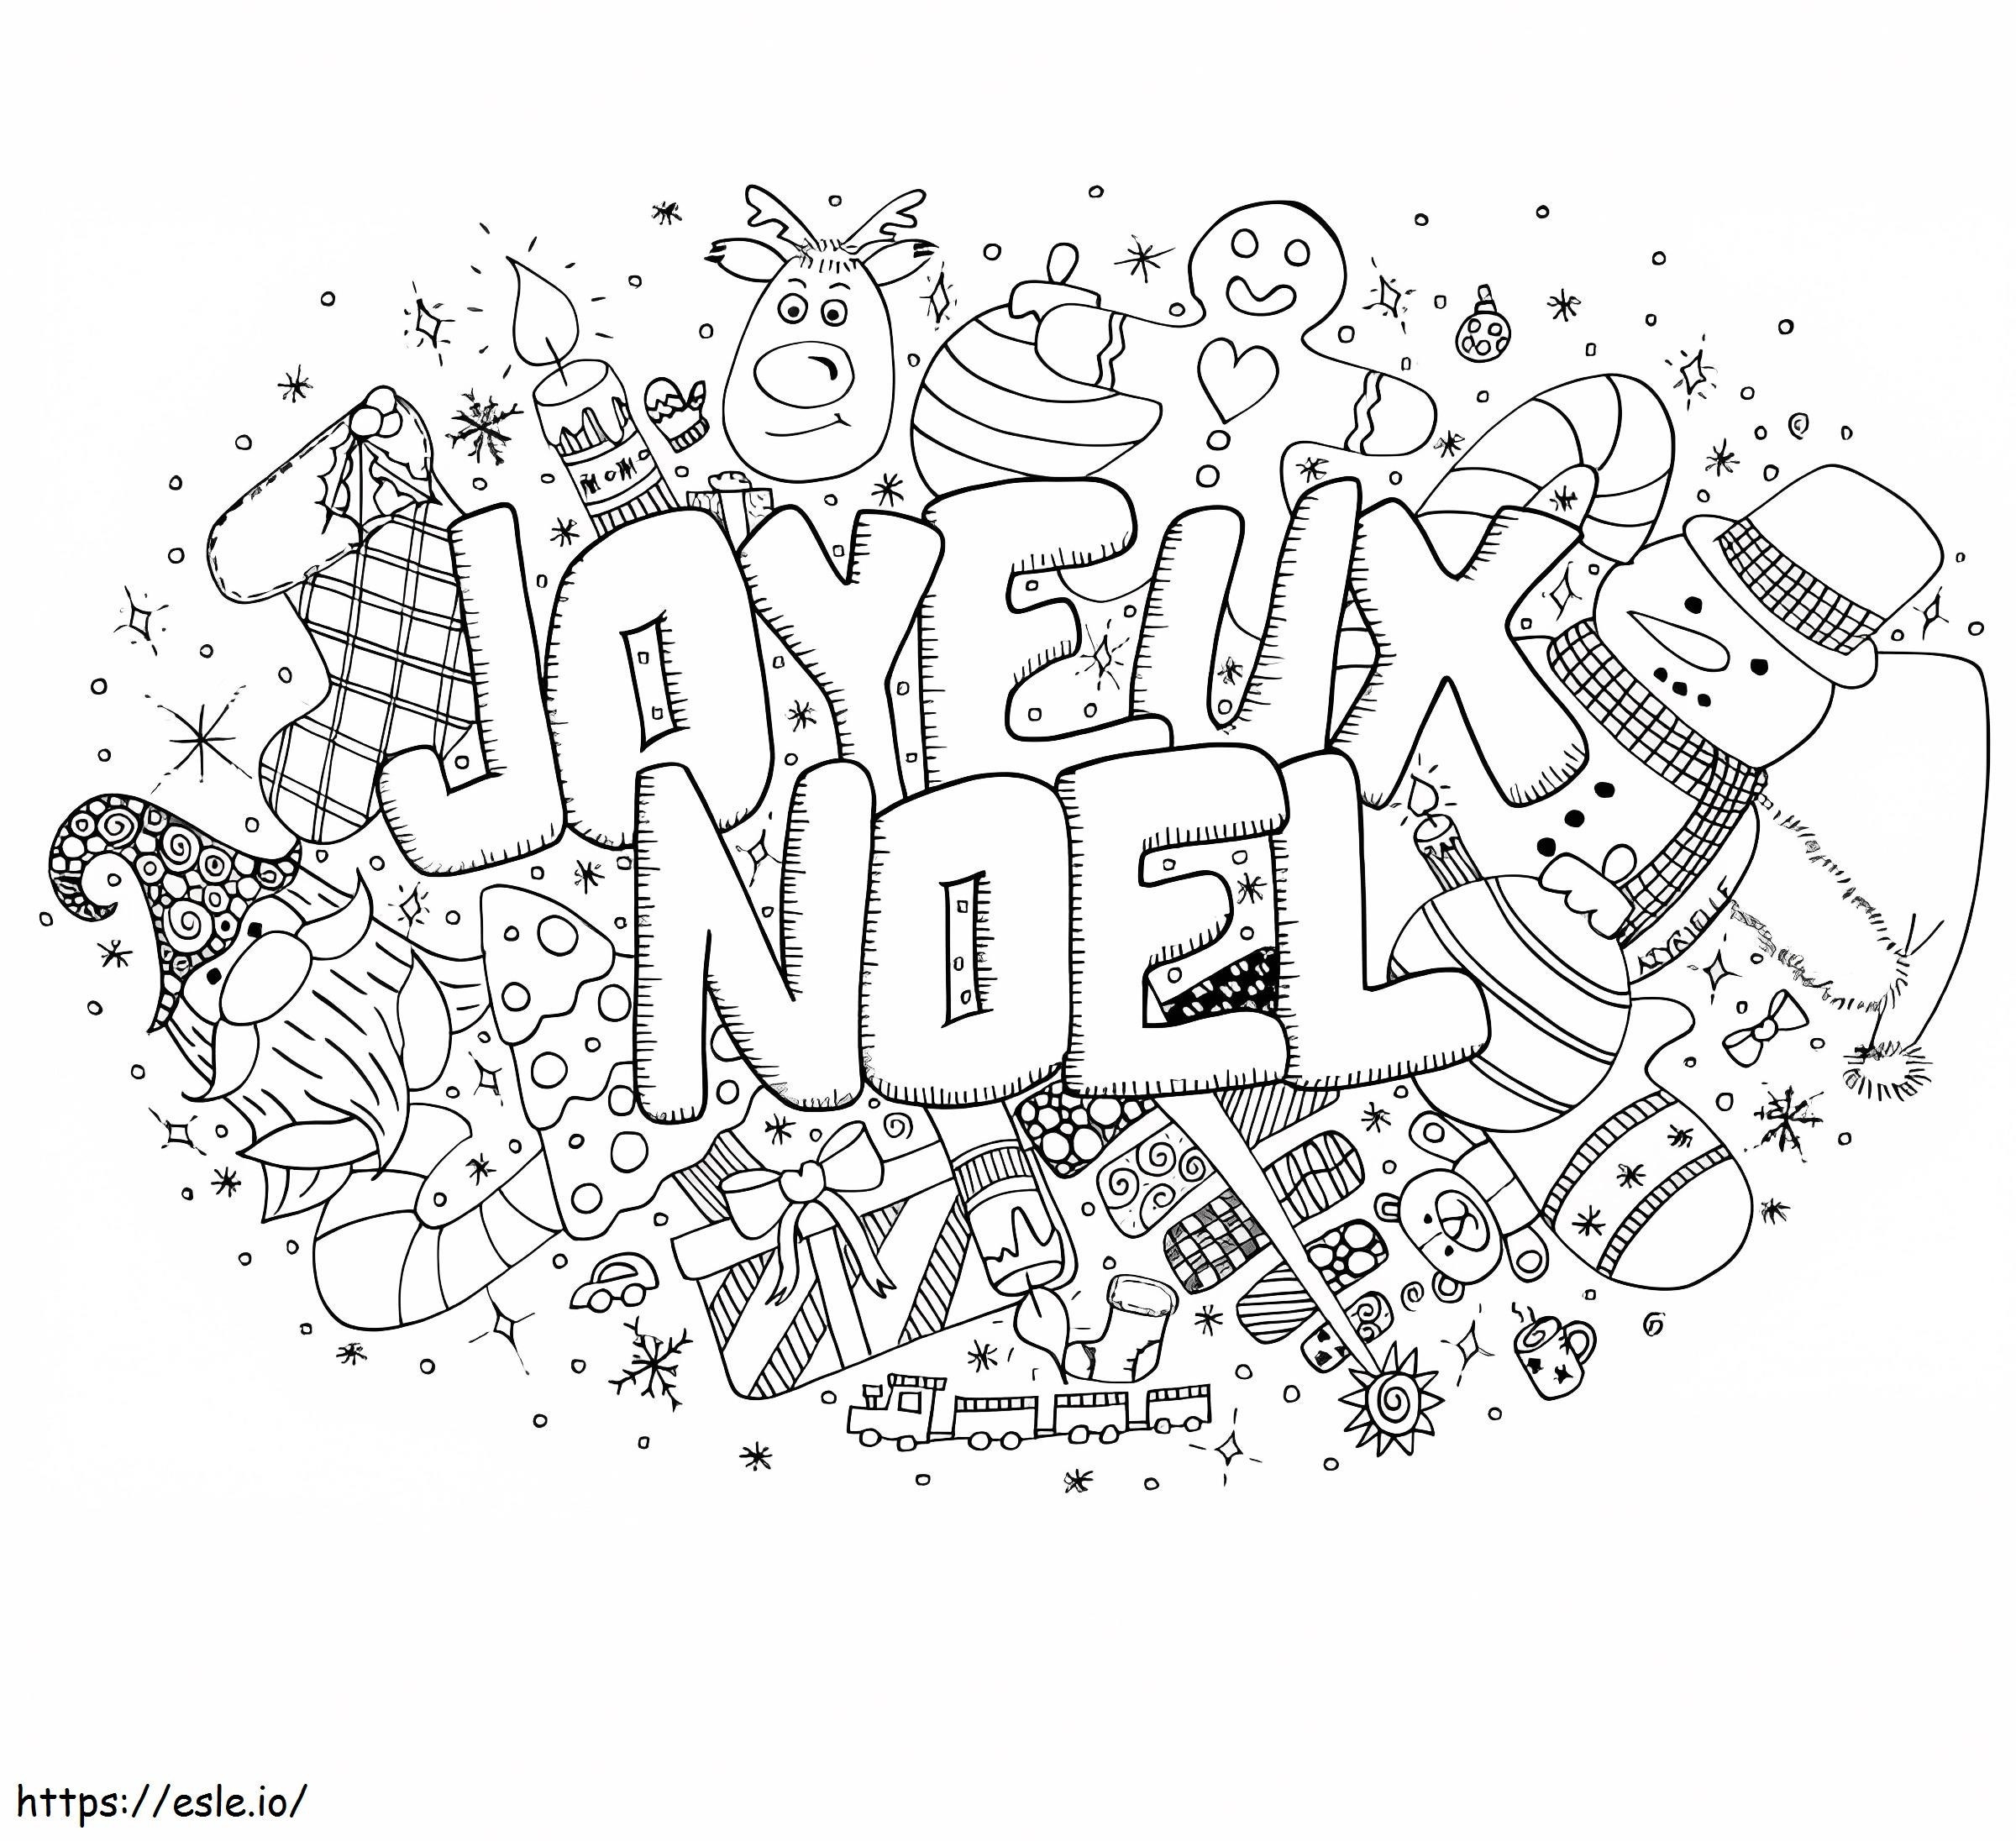 Merry Christmas 2 coloring page